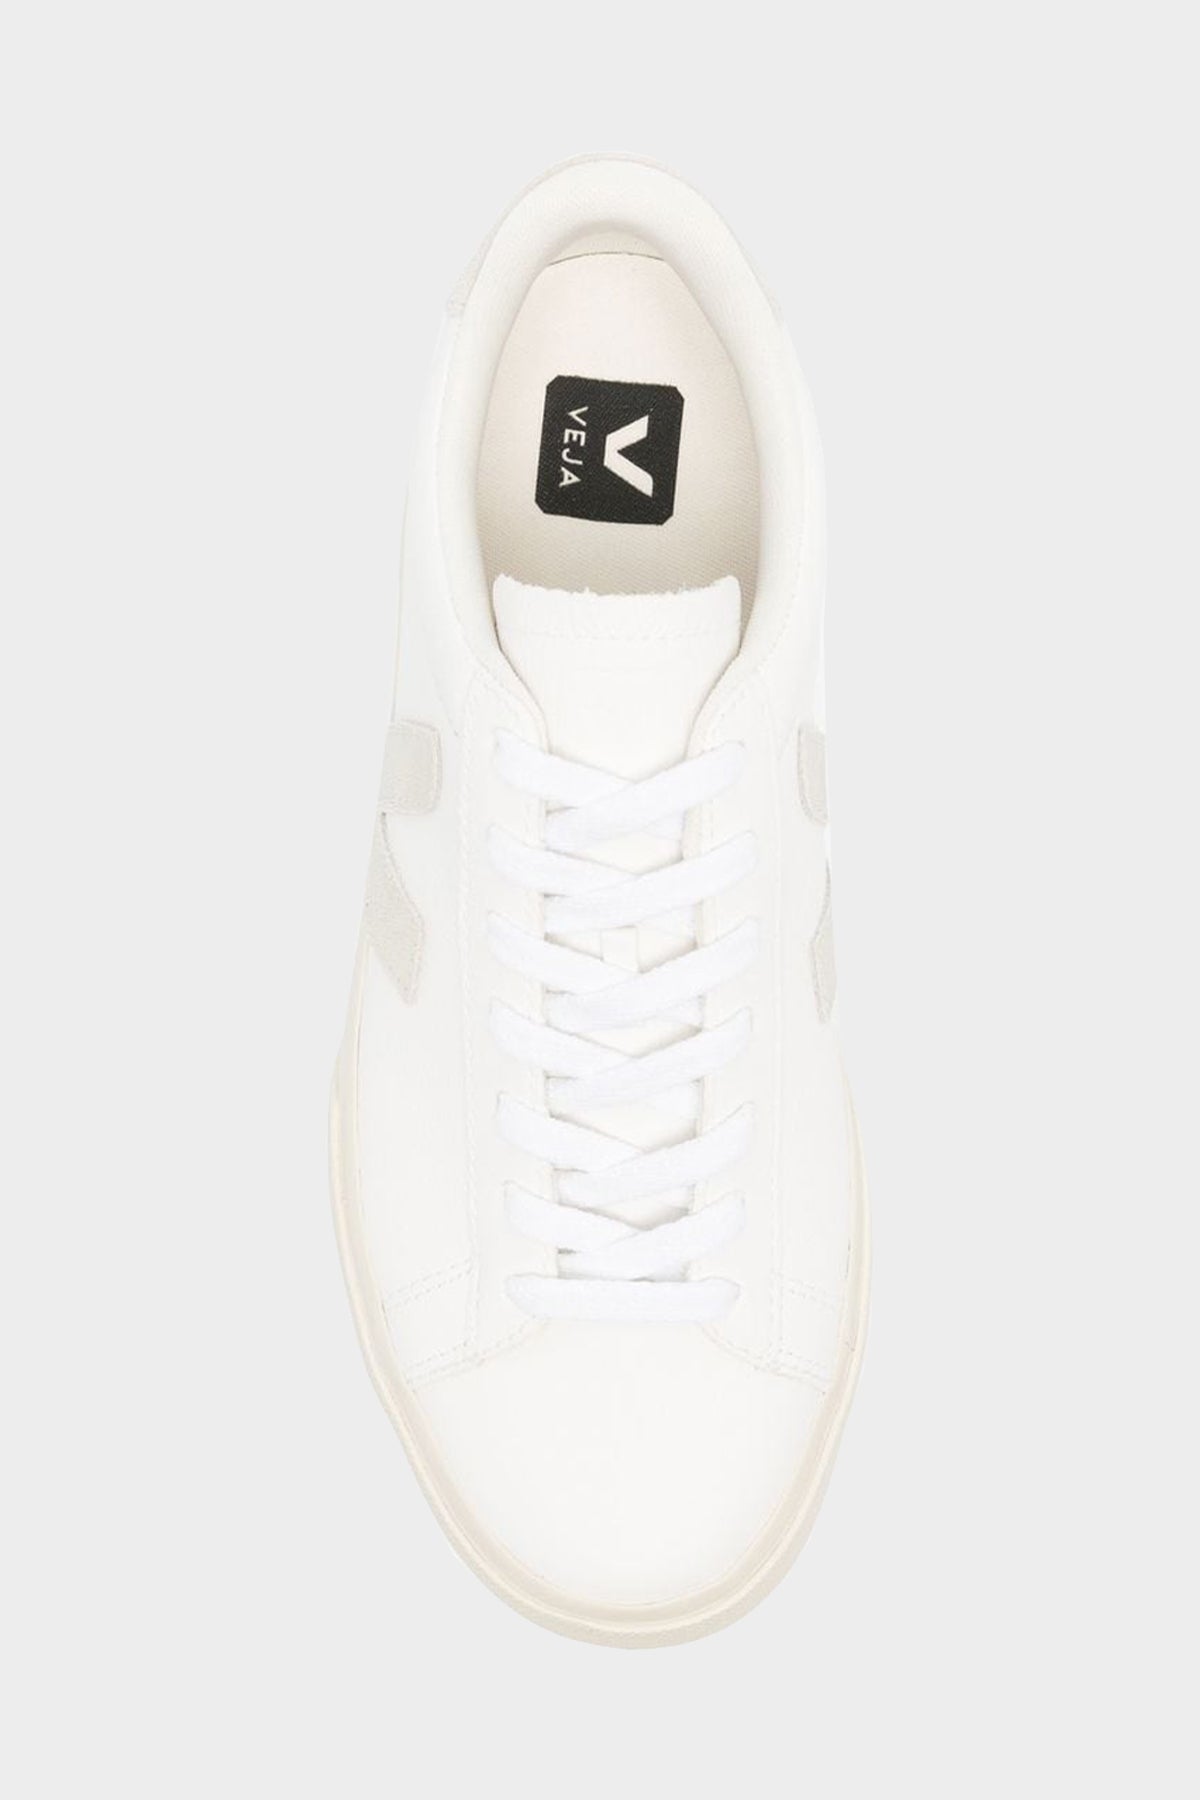 Campo Chromefree Leather Sneaker in White Natural - shop-olivia.com